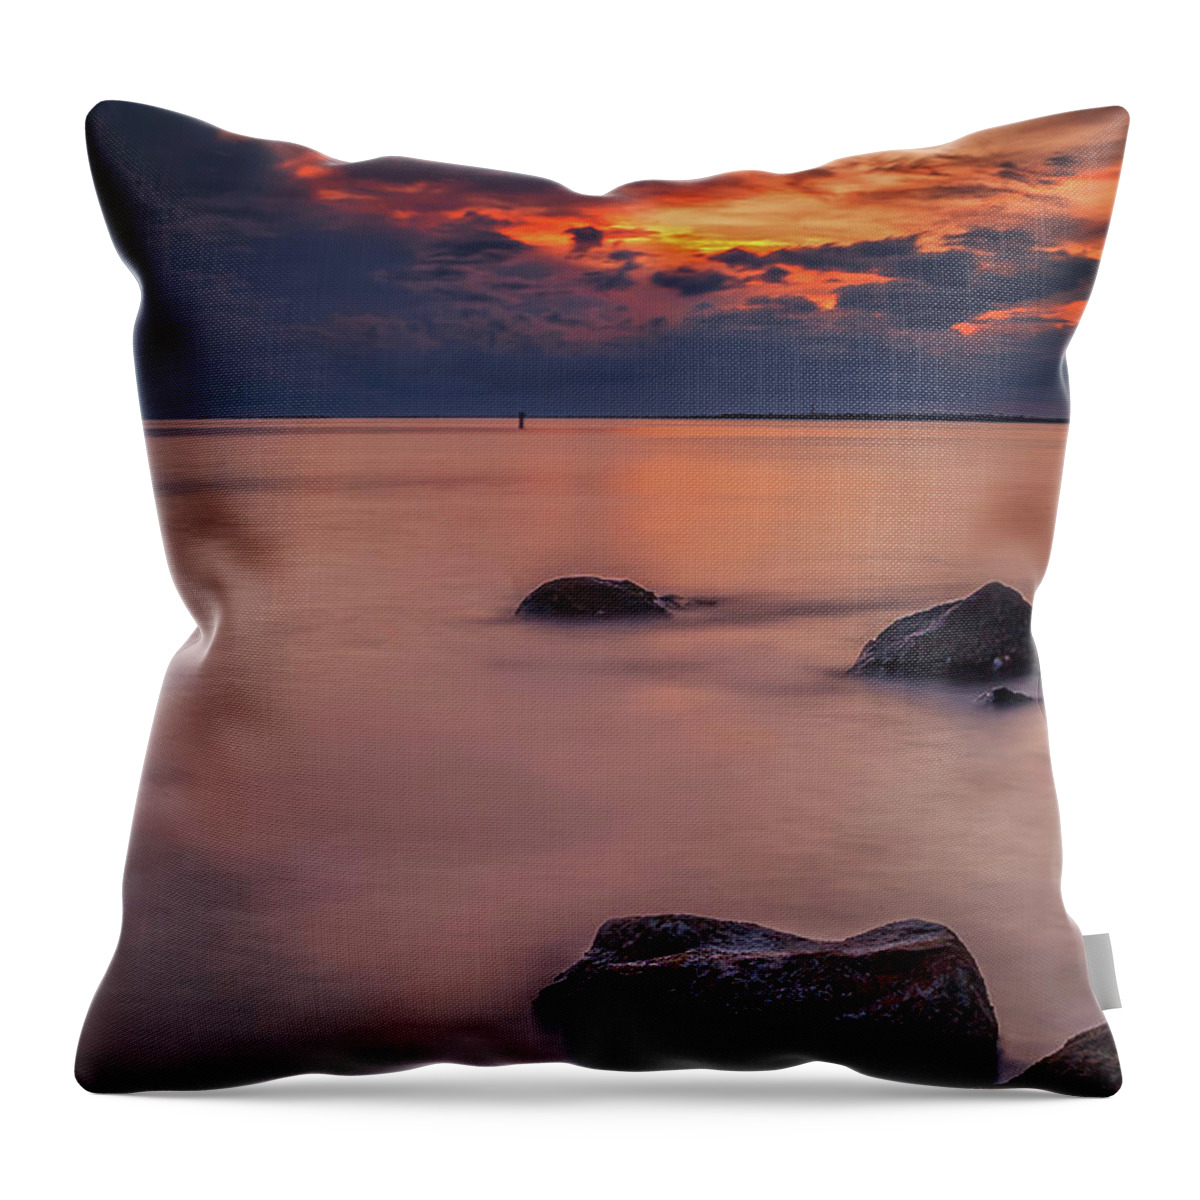 Fred Howard Island Throw Pillow featuring the photograph Island Retreat by Todd Rogers